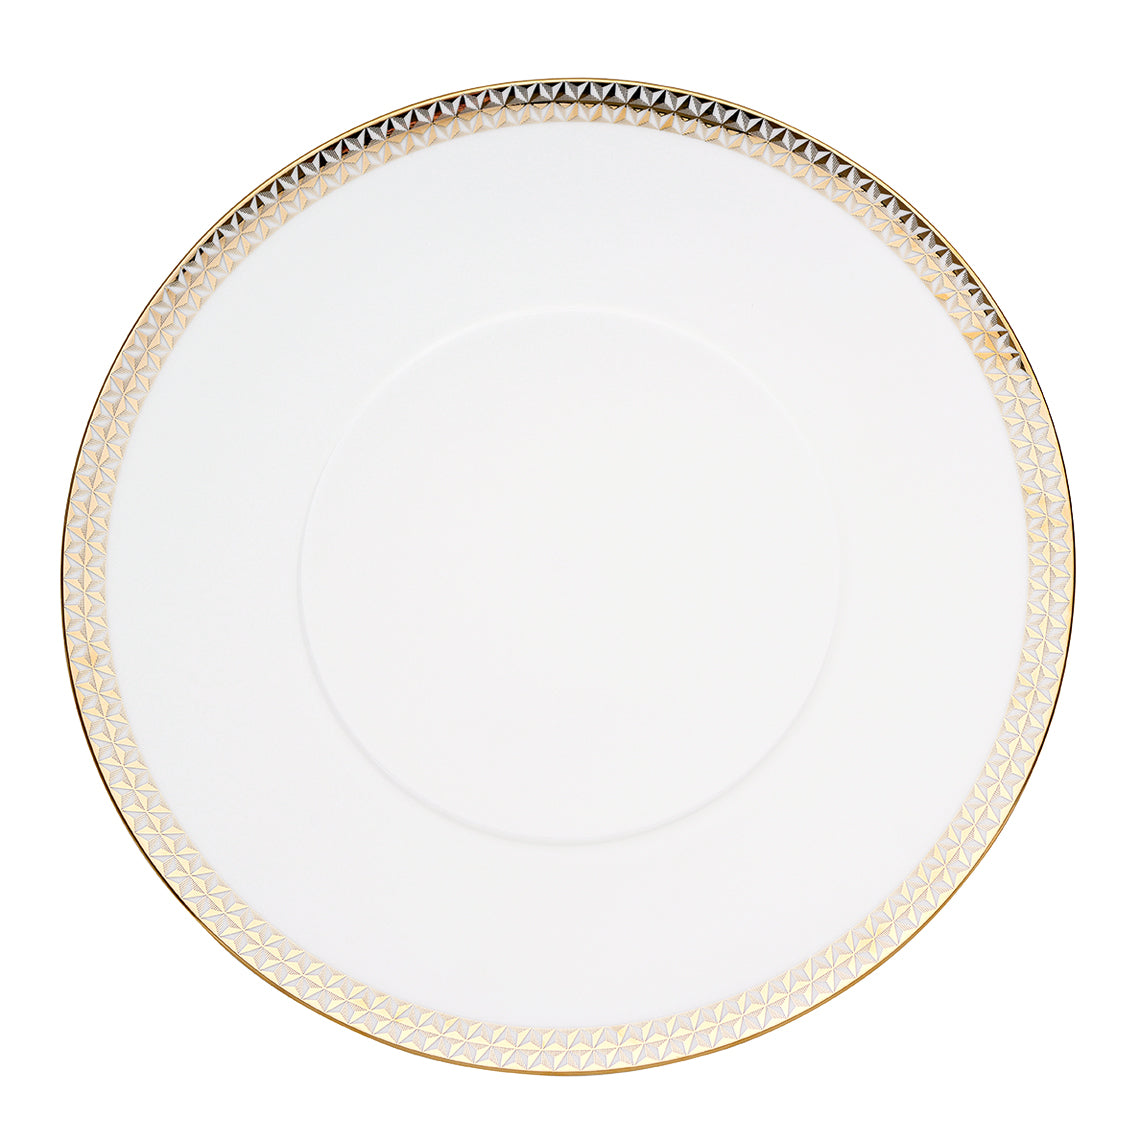 Prouna Gem Cut Gold Charger Plate White Background Photo